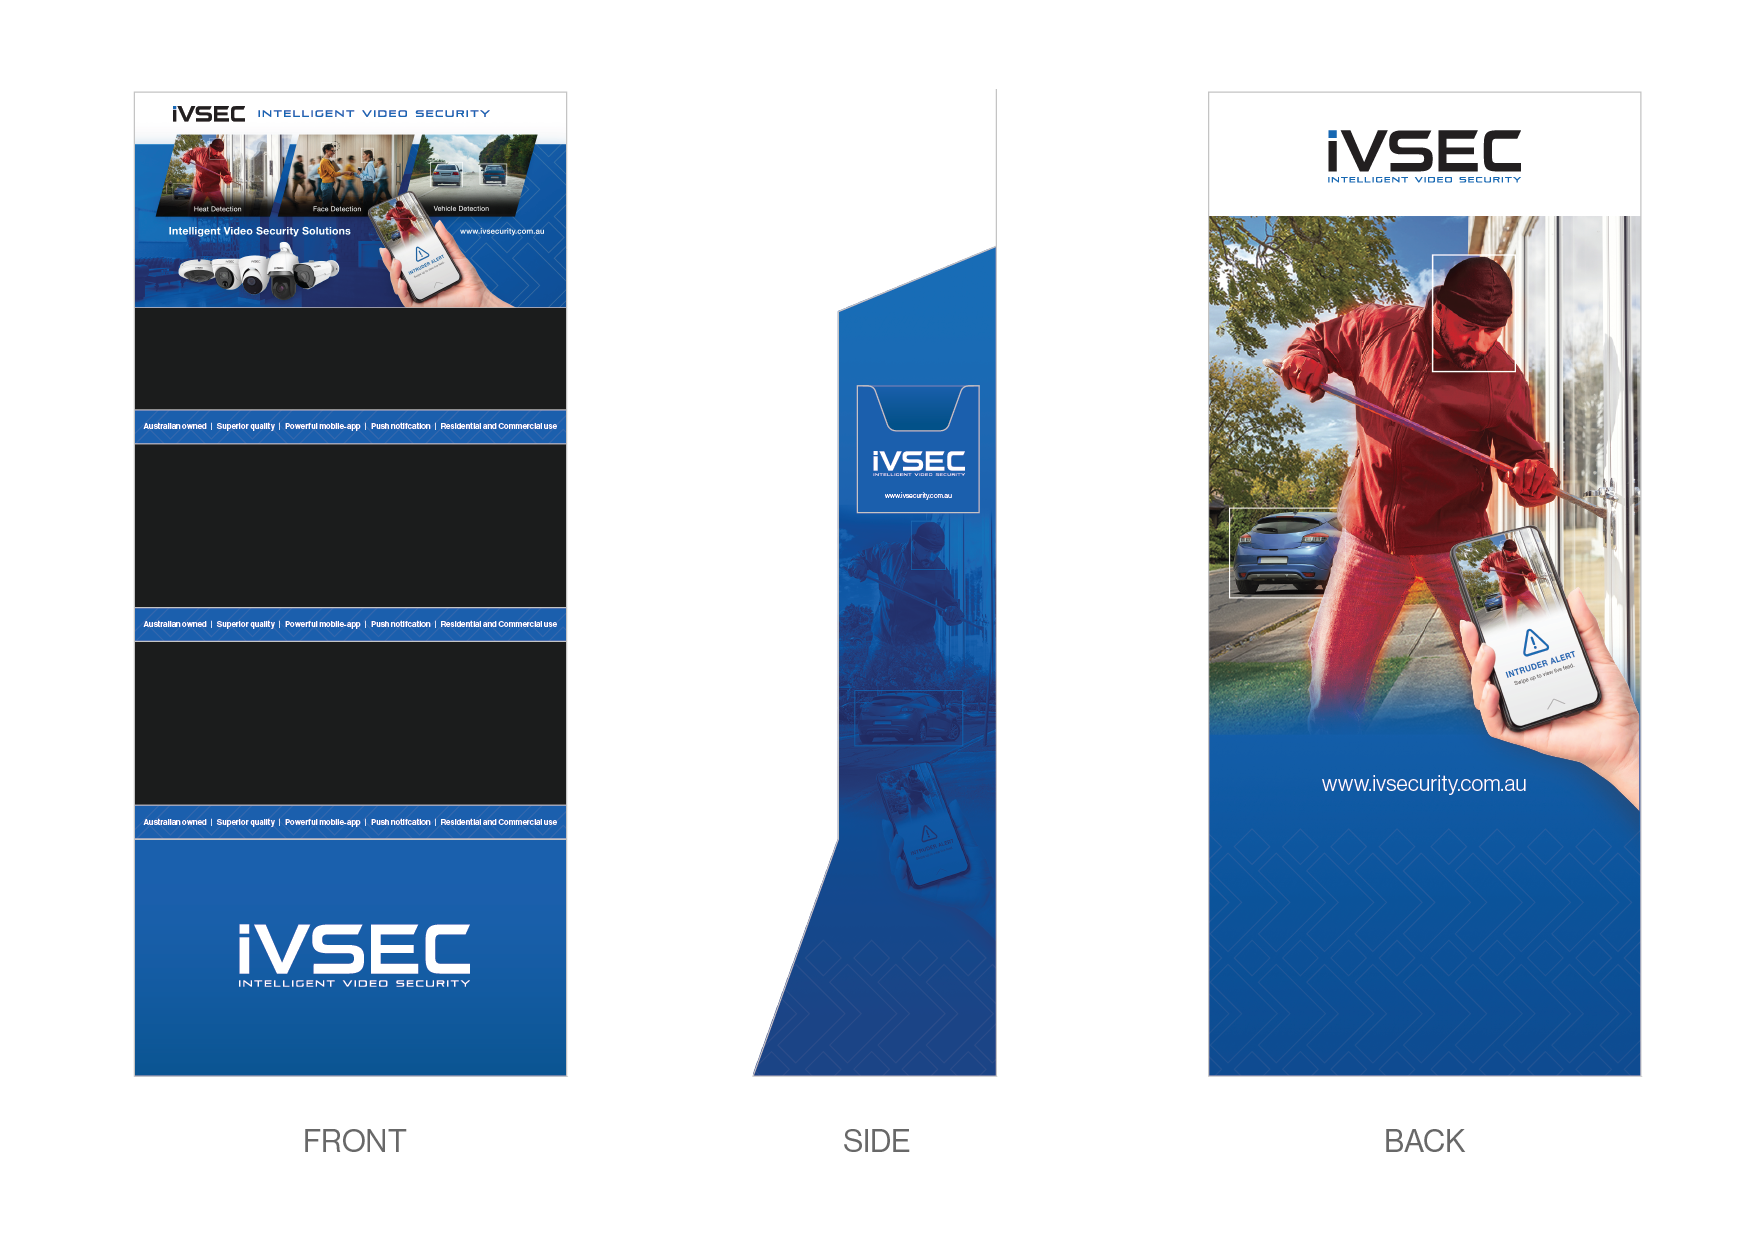 IVSEC POS DISPLAY STAND -Footprint 70 X 42 X 180CM - Free with IVSEC stocking order image